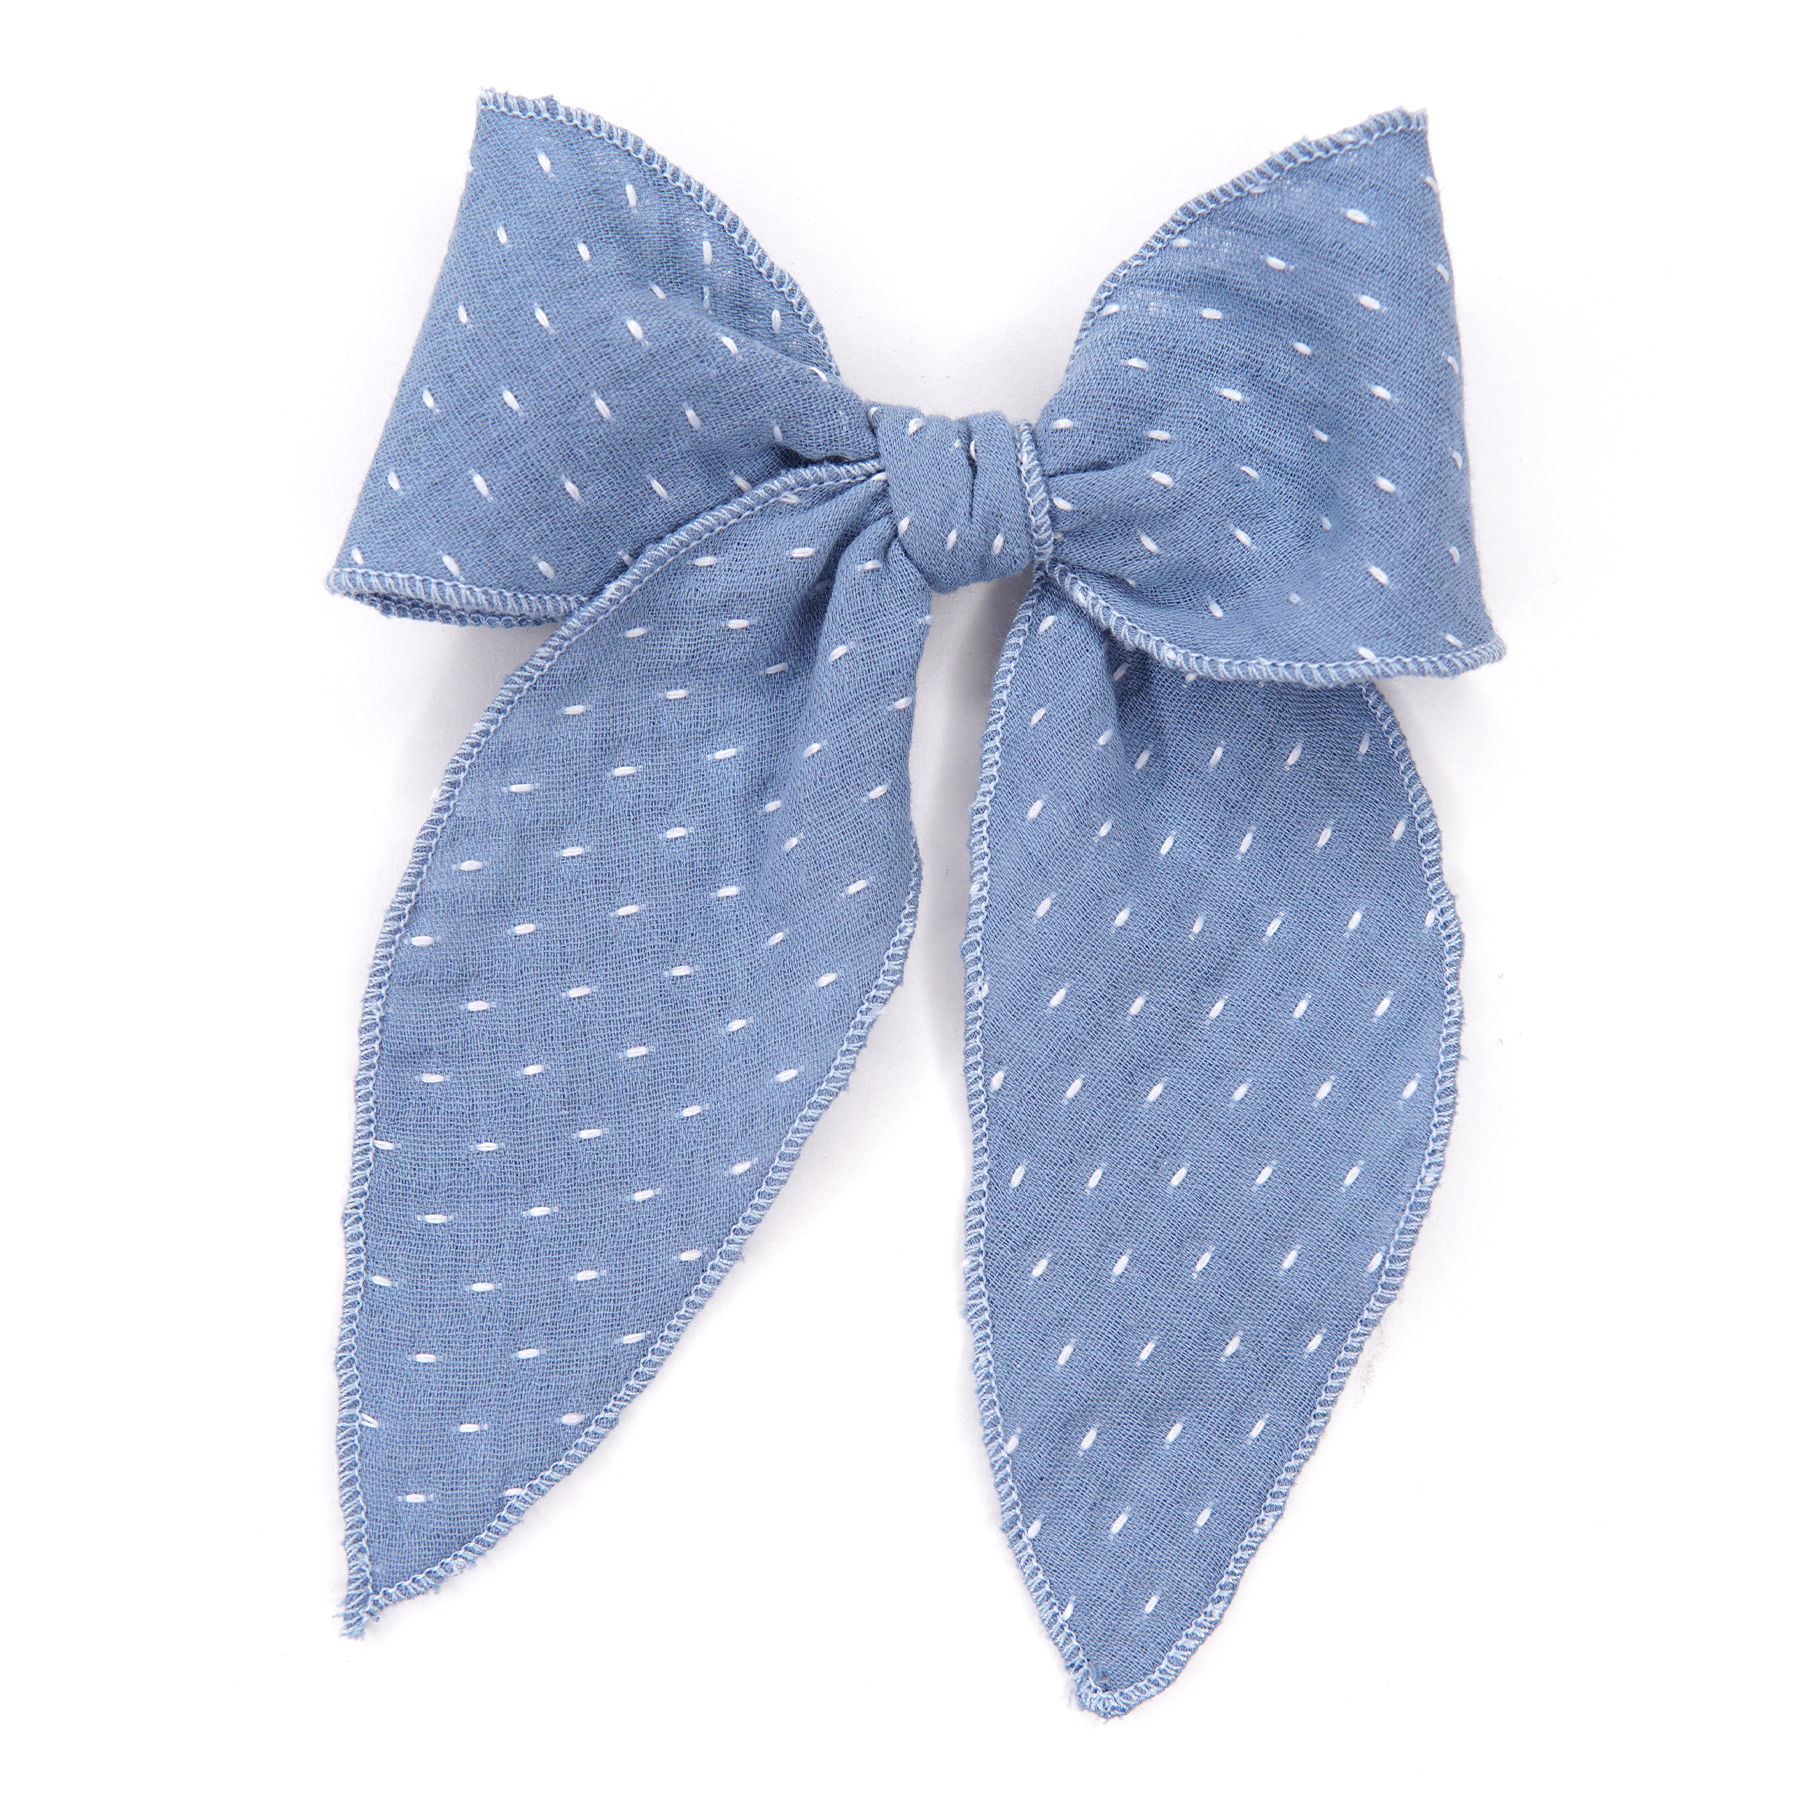 Bay - Hair Bow for Girls - Large